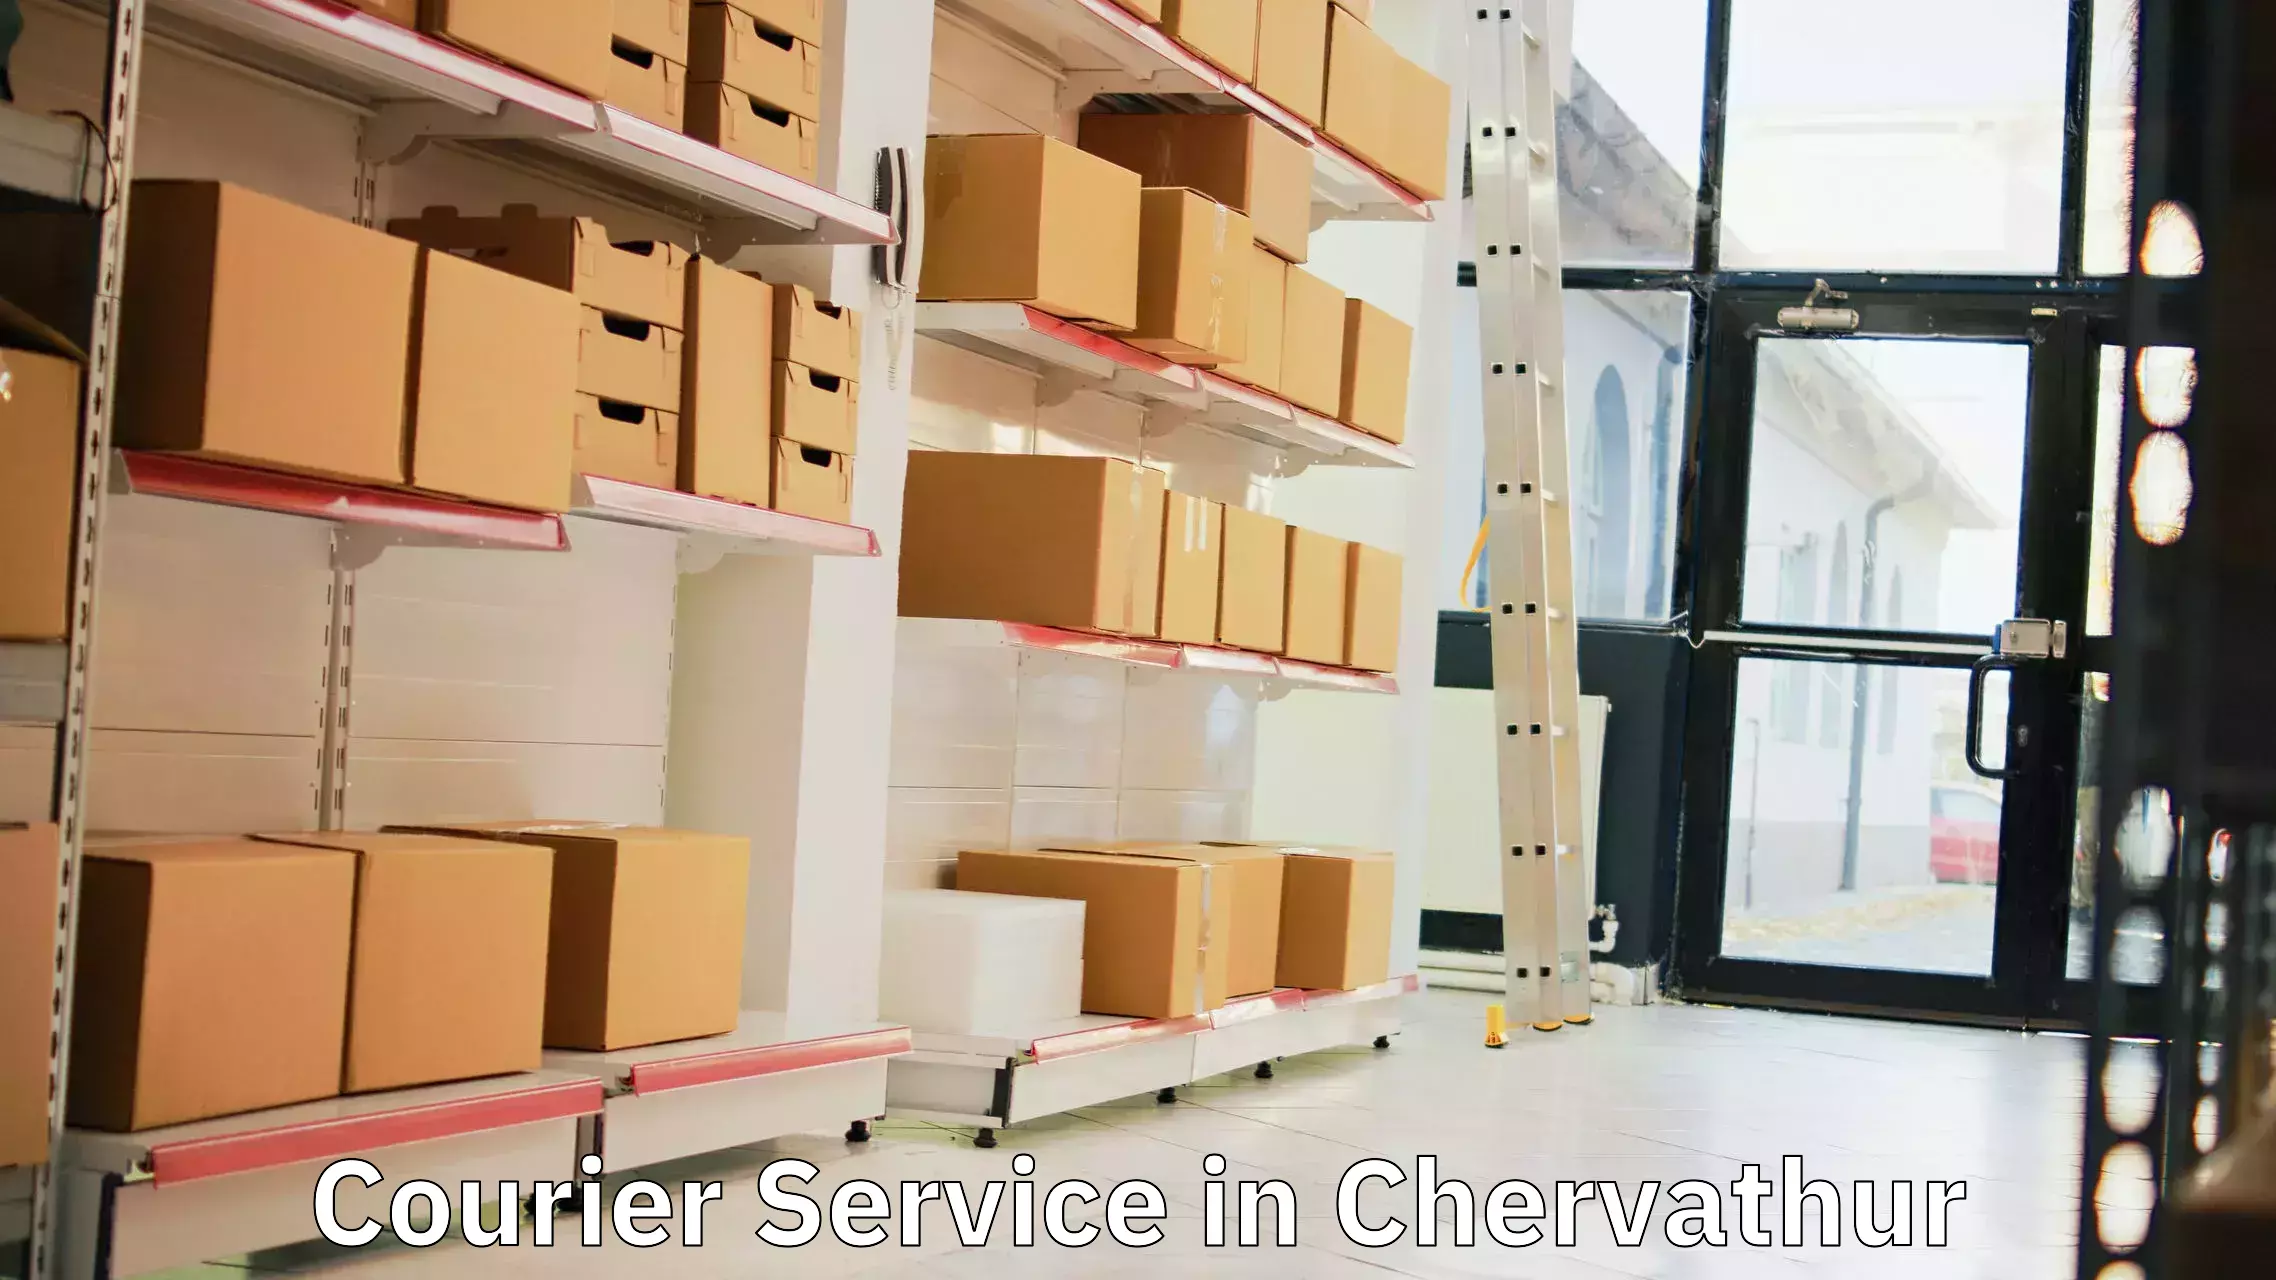 Secure package delivery in Chervathur